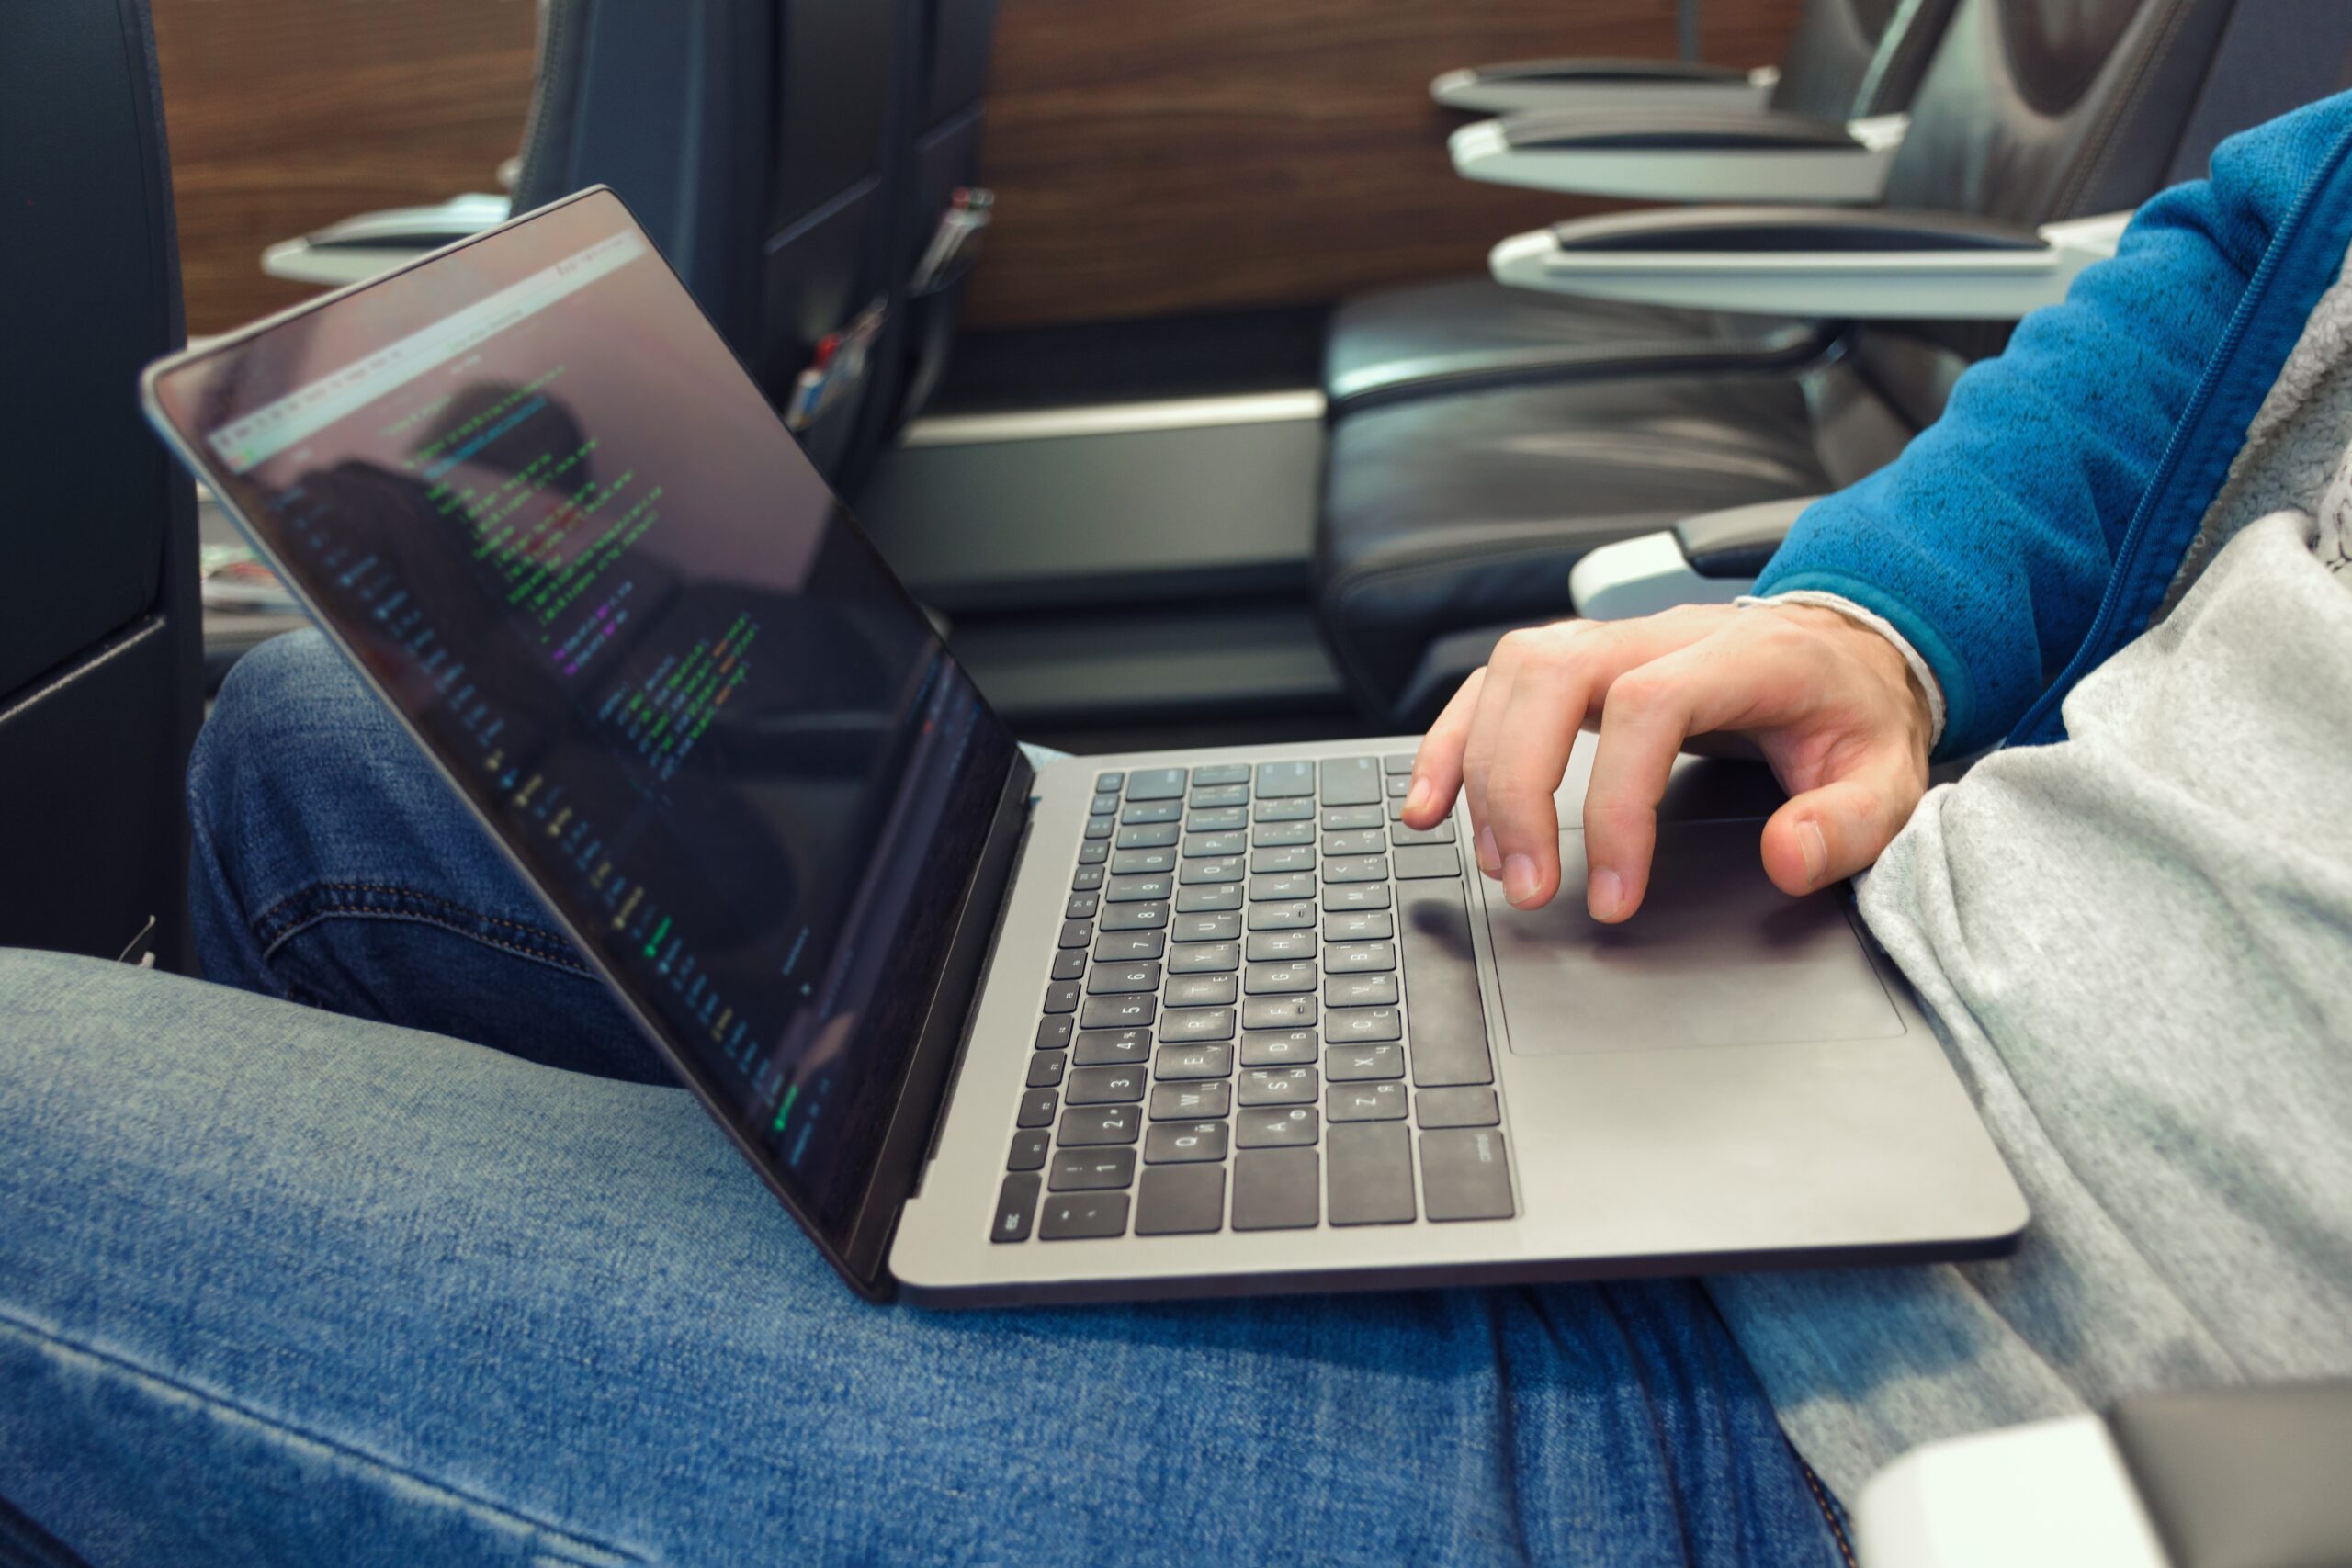 Cover image for the content on 'Analyzing Successful Legacy System Modernization Efforts by Platform Engineers,' featuring a person writing software code on a laptop while in transit.